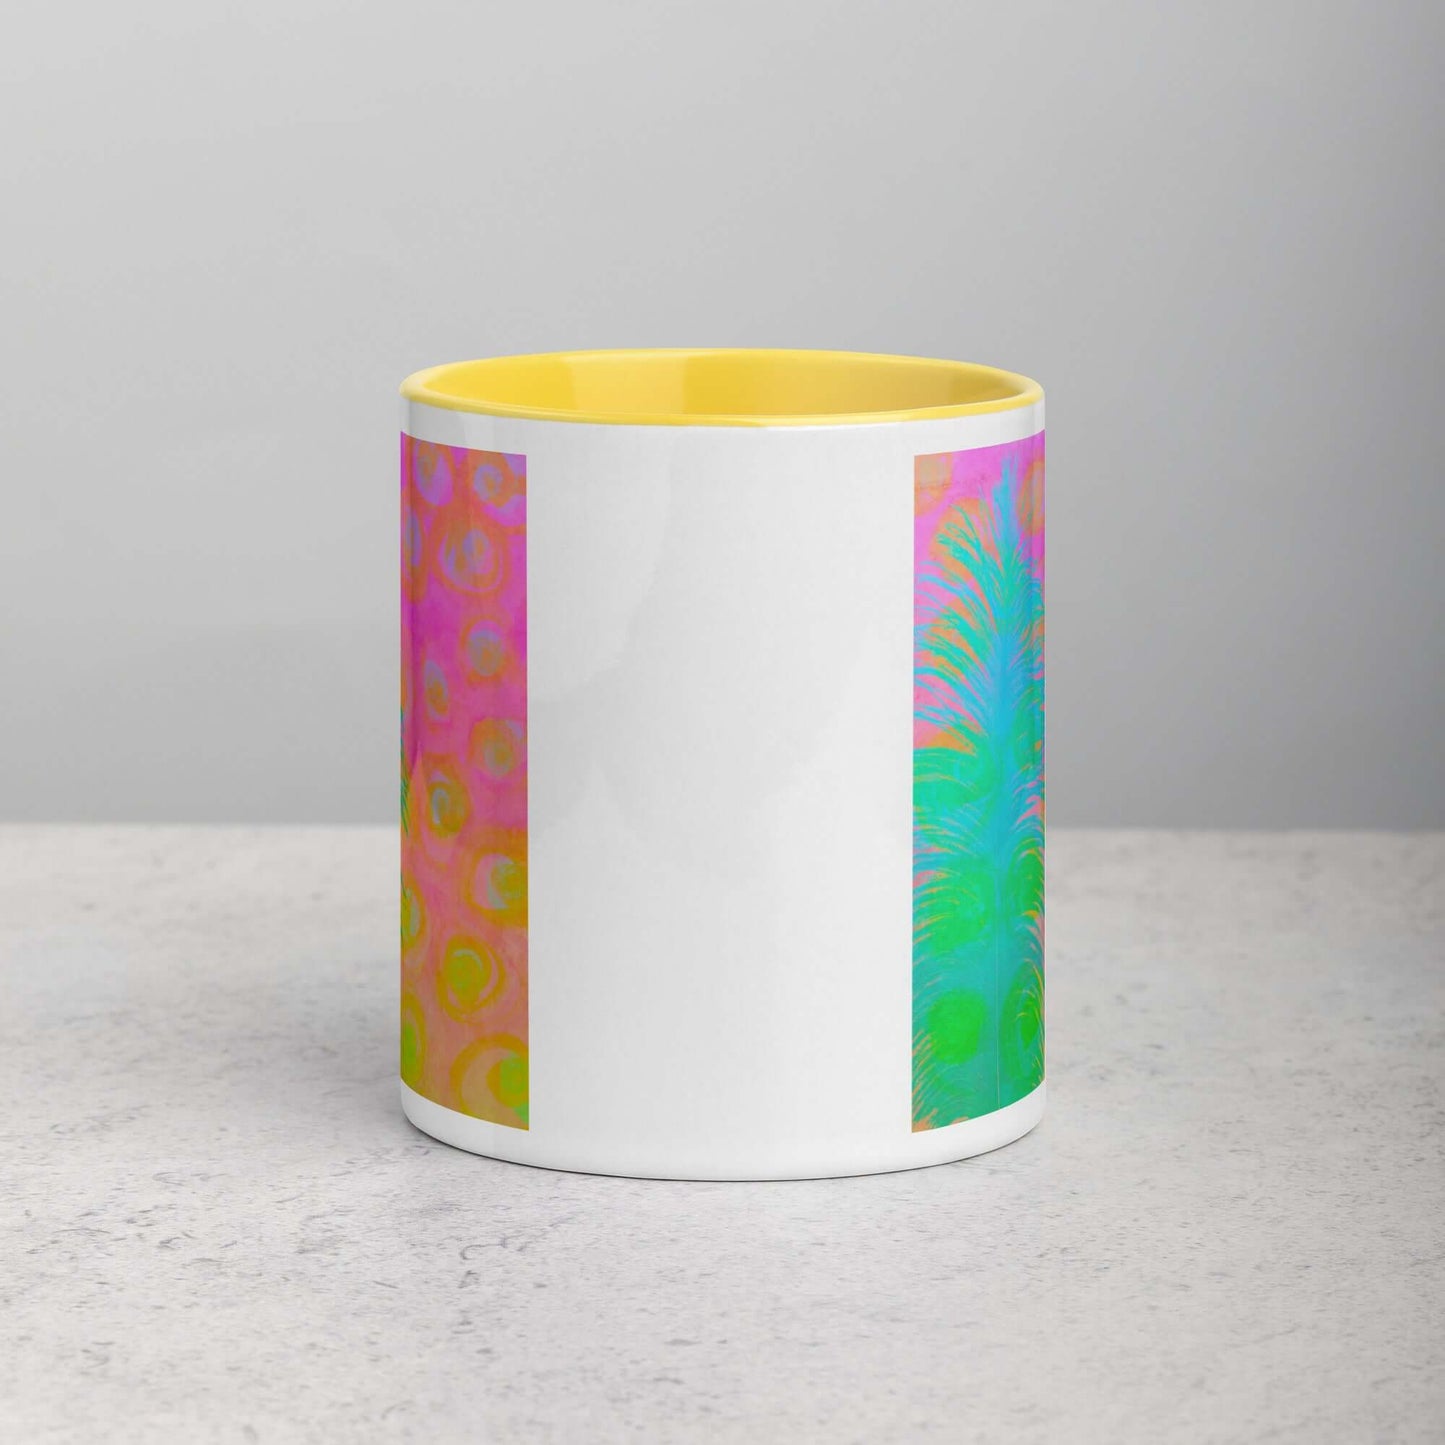 Bright Blue-Green Ostrich Feather on Pink and Yellow Background “My Other Half” Abstract Art Mug with Bright Yellow Color Inside Side View